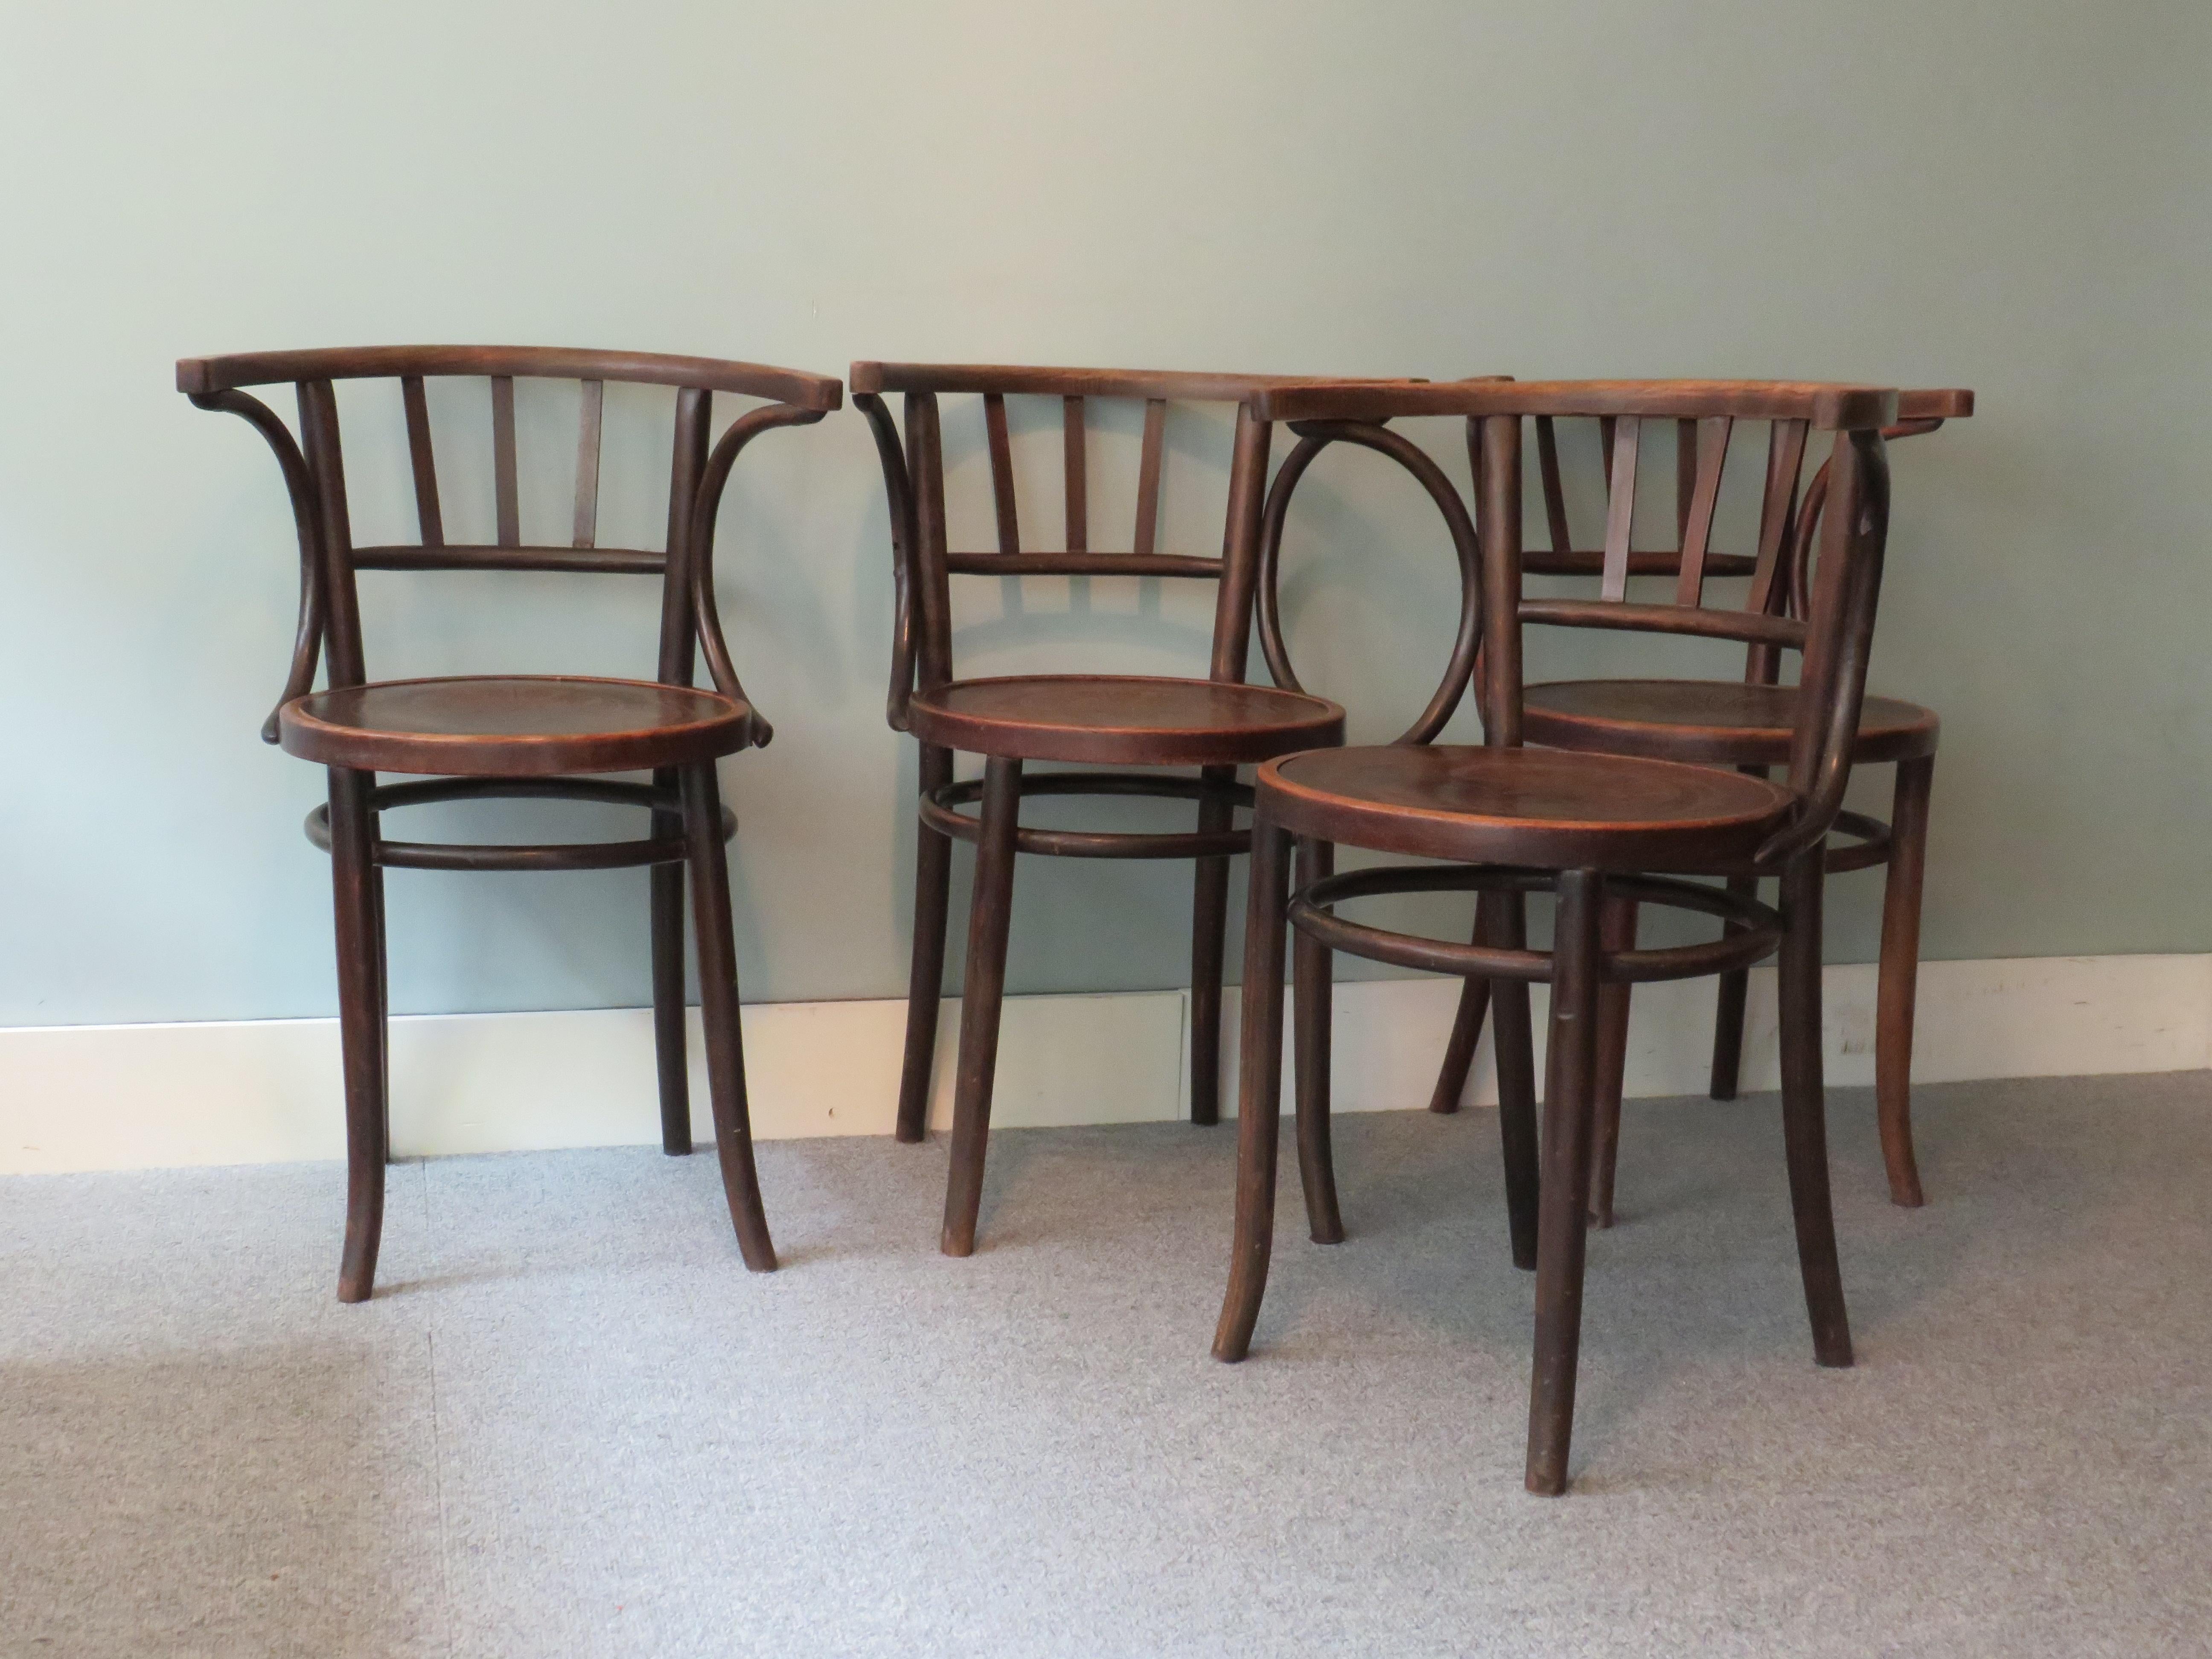 Art Nouveau Bentwood Chairs, Early 1900 Attributed to Thonet